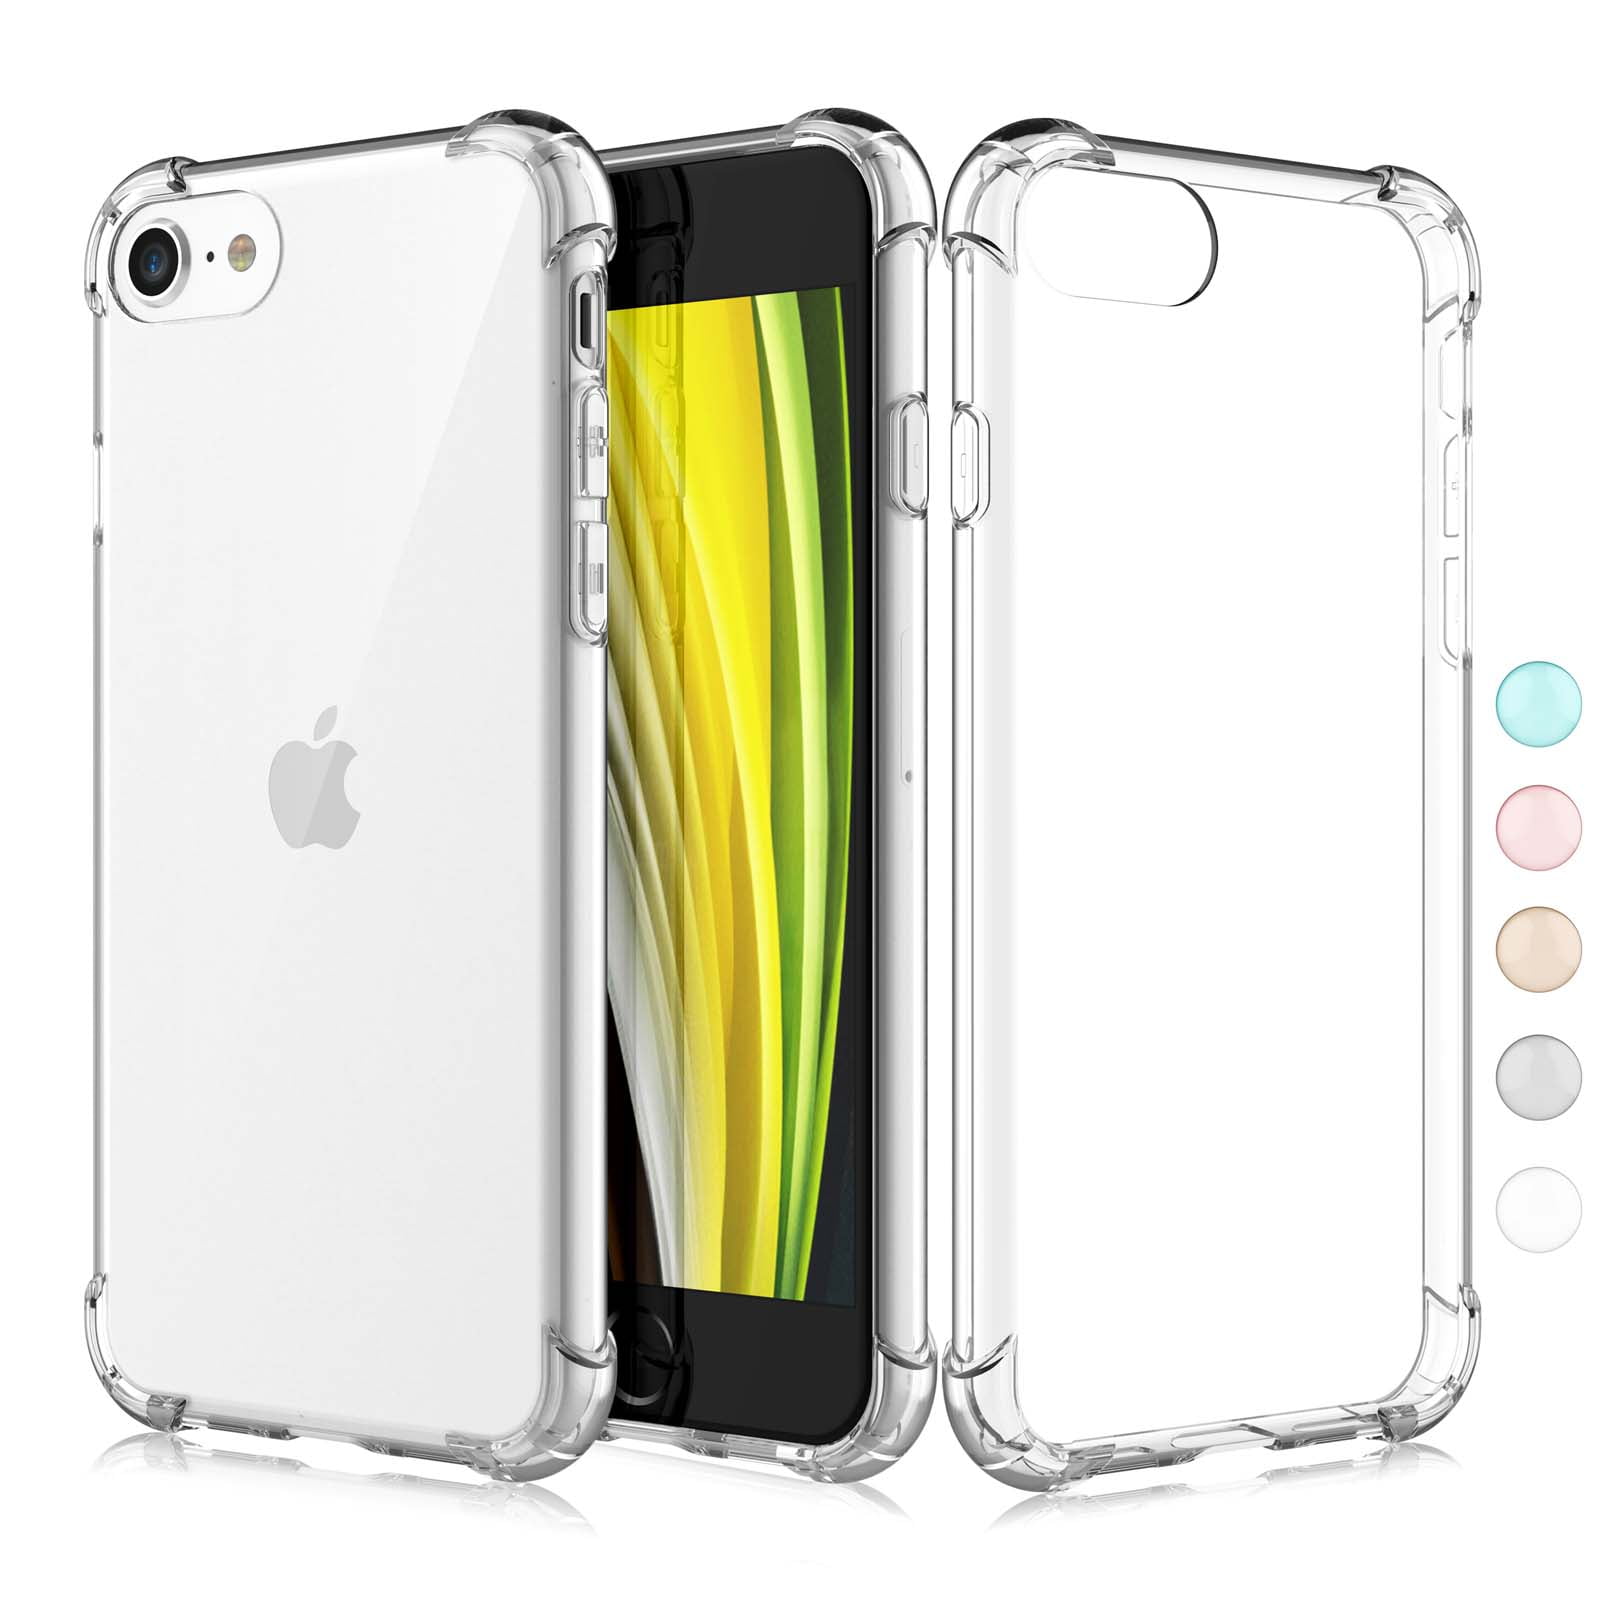 RASH Accessories TPU Bumper Case for iPhone 6/6S Cover Clear With Free Tempered Glass New ShockProof Silicone Case